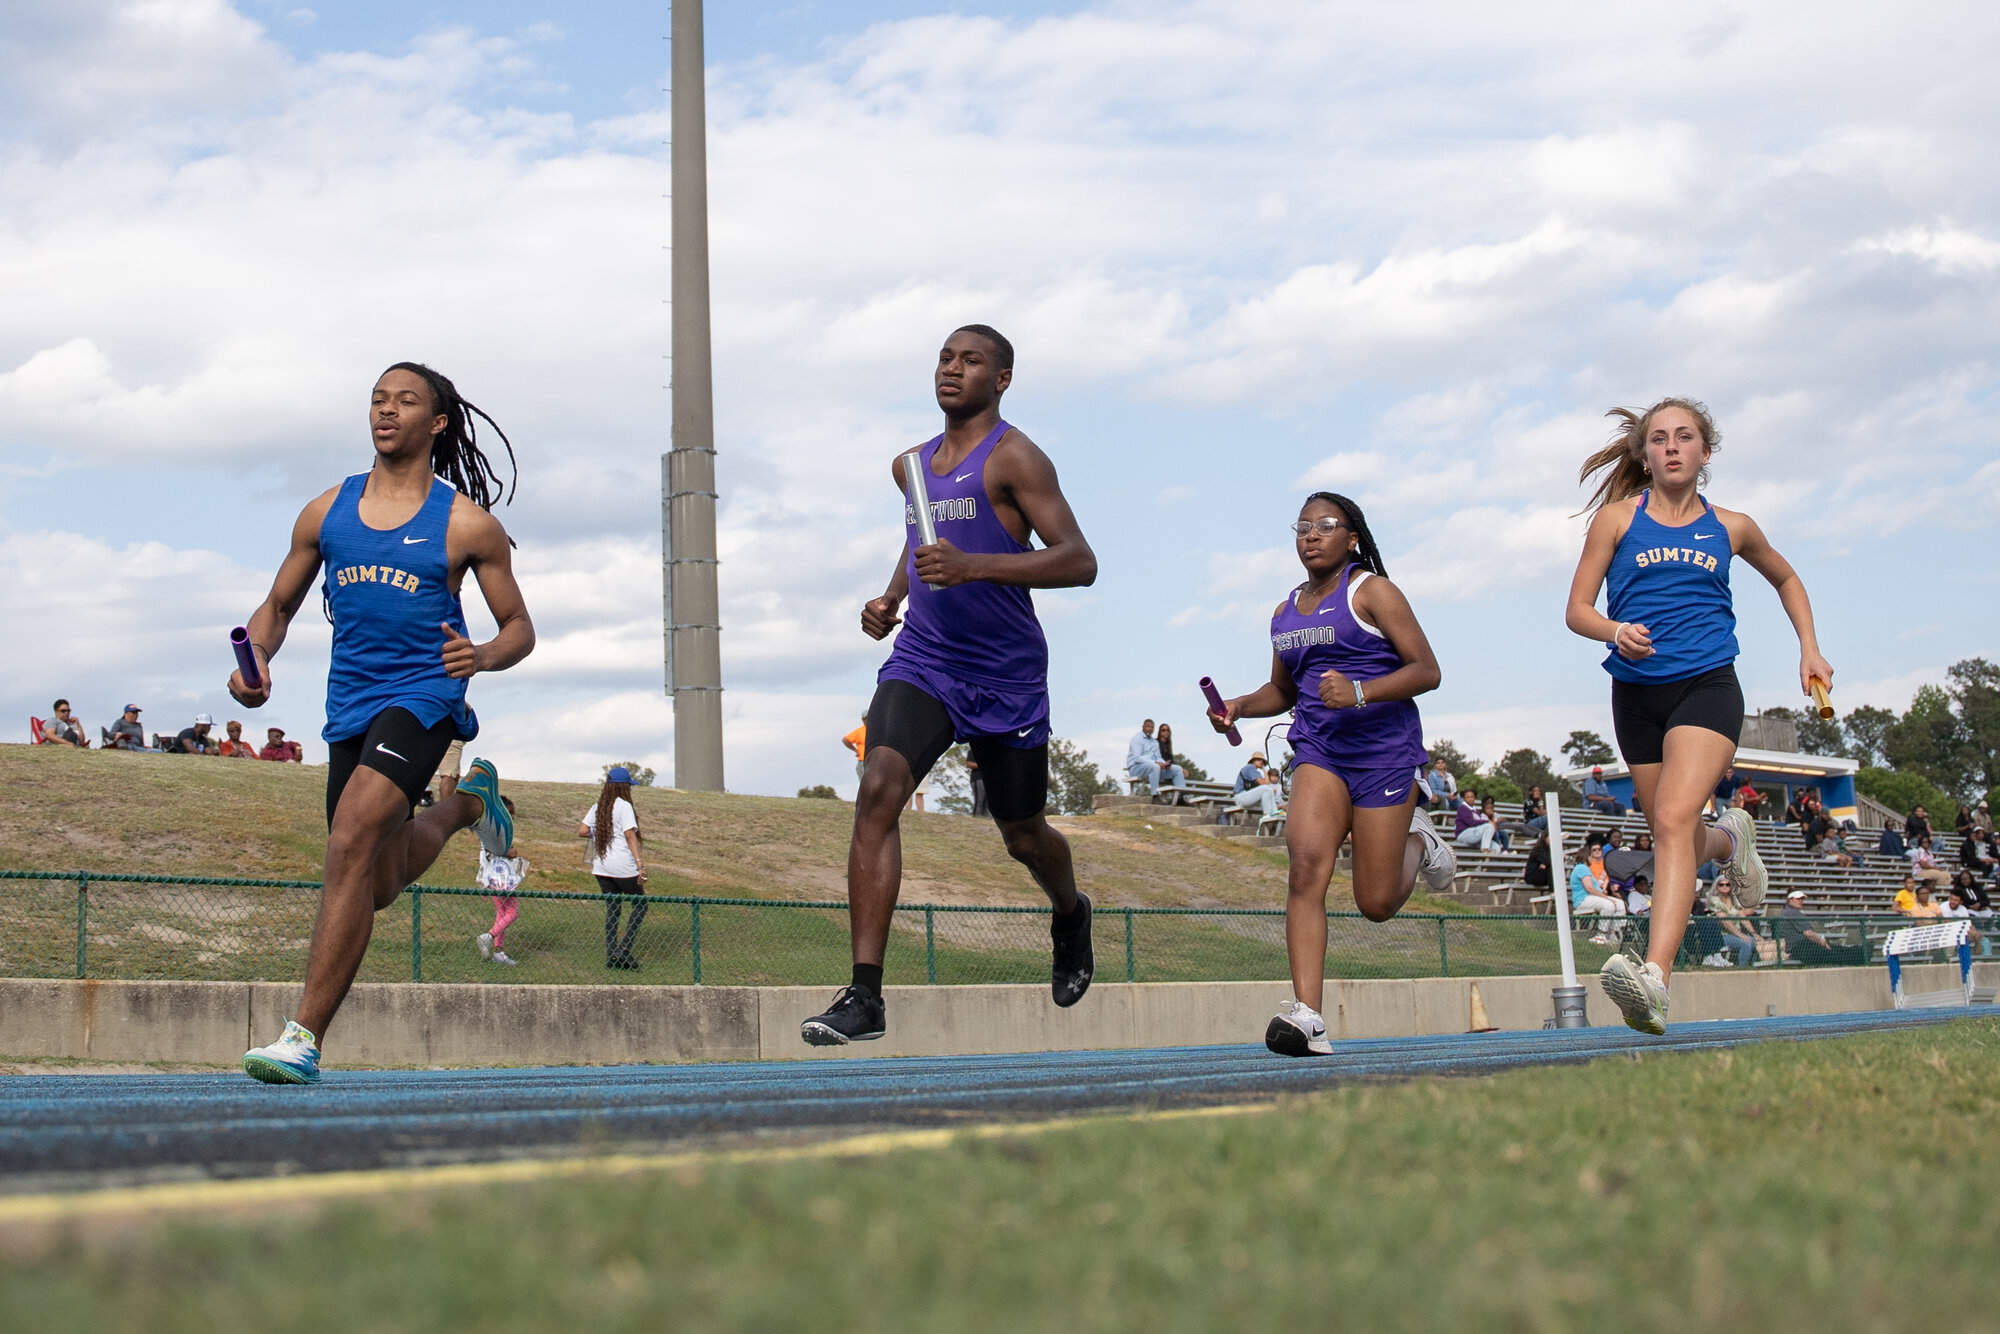 The Sumter High track team hosted its final home meet of the season at Memorial Stadium on Wednesday, April 24. They were joined locally by Crestwood and Lakewood.